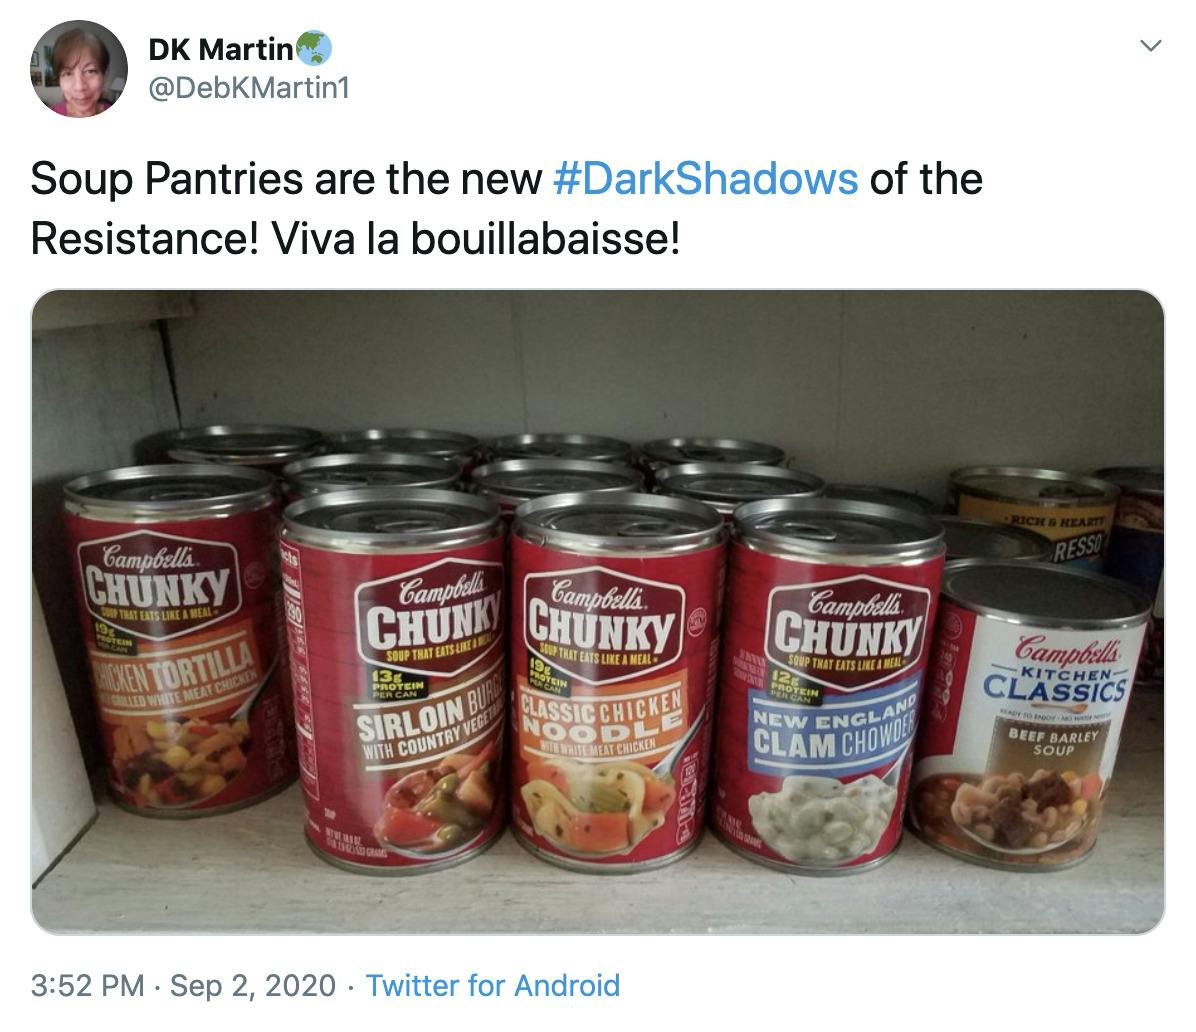 "Soup Pantries are the new #DarkShadows of the Resistance! Viva la bouillabaisse!" picture of a selection of Campbell's chunky soup